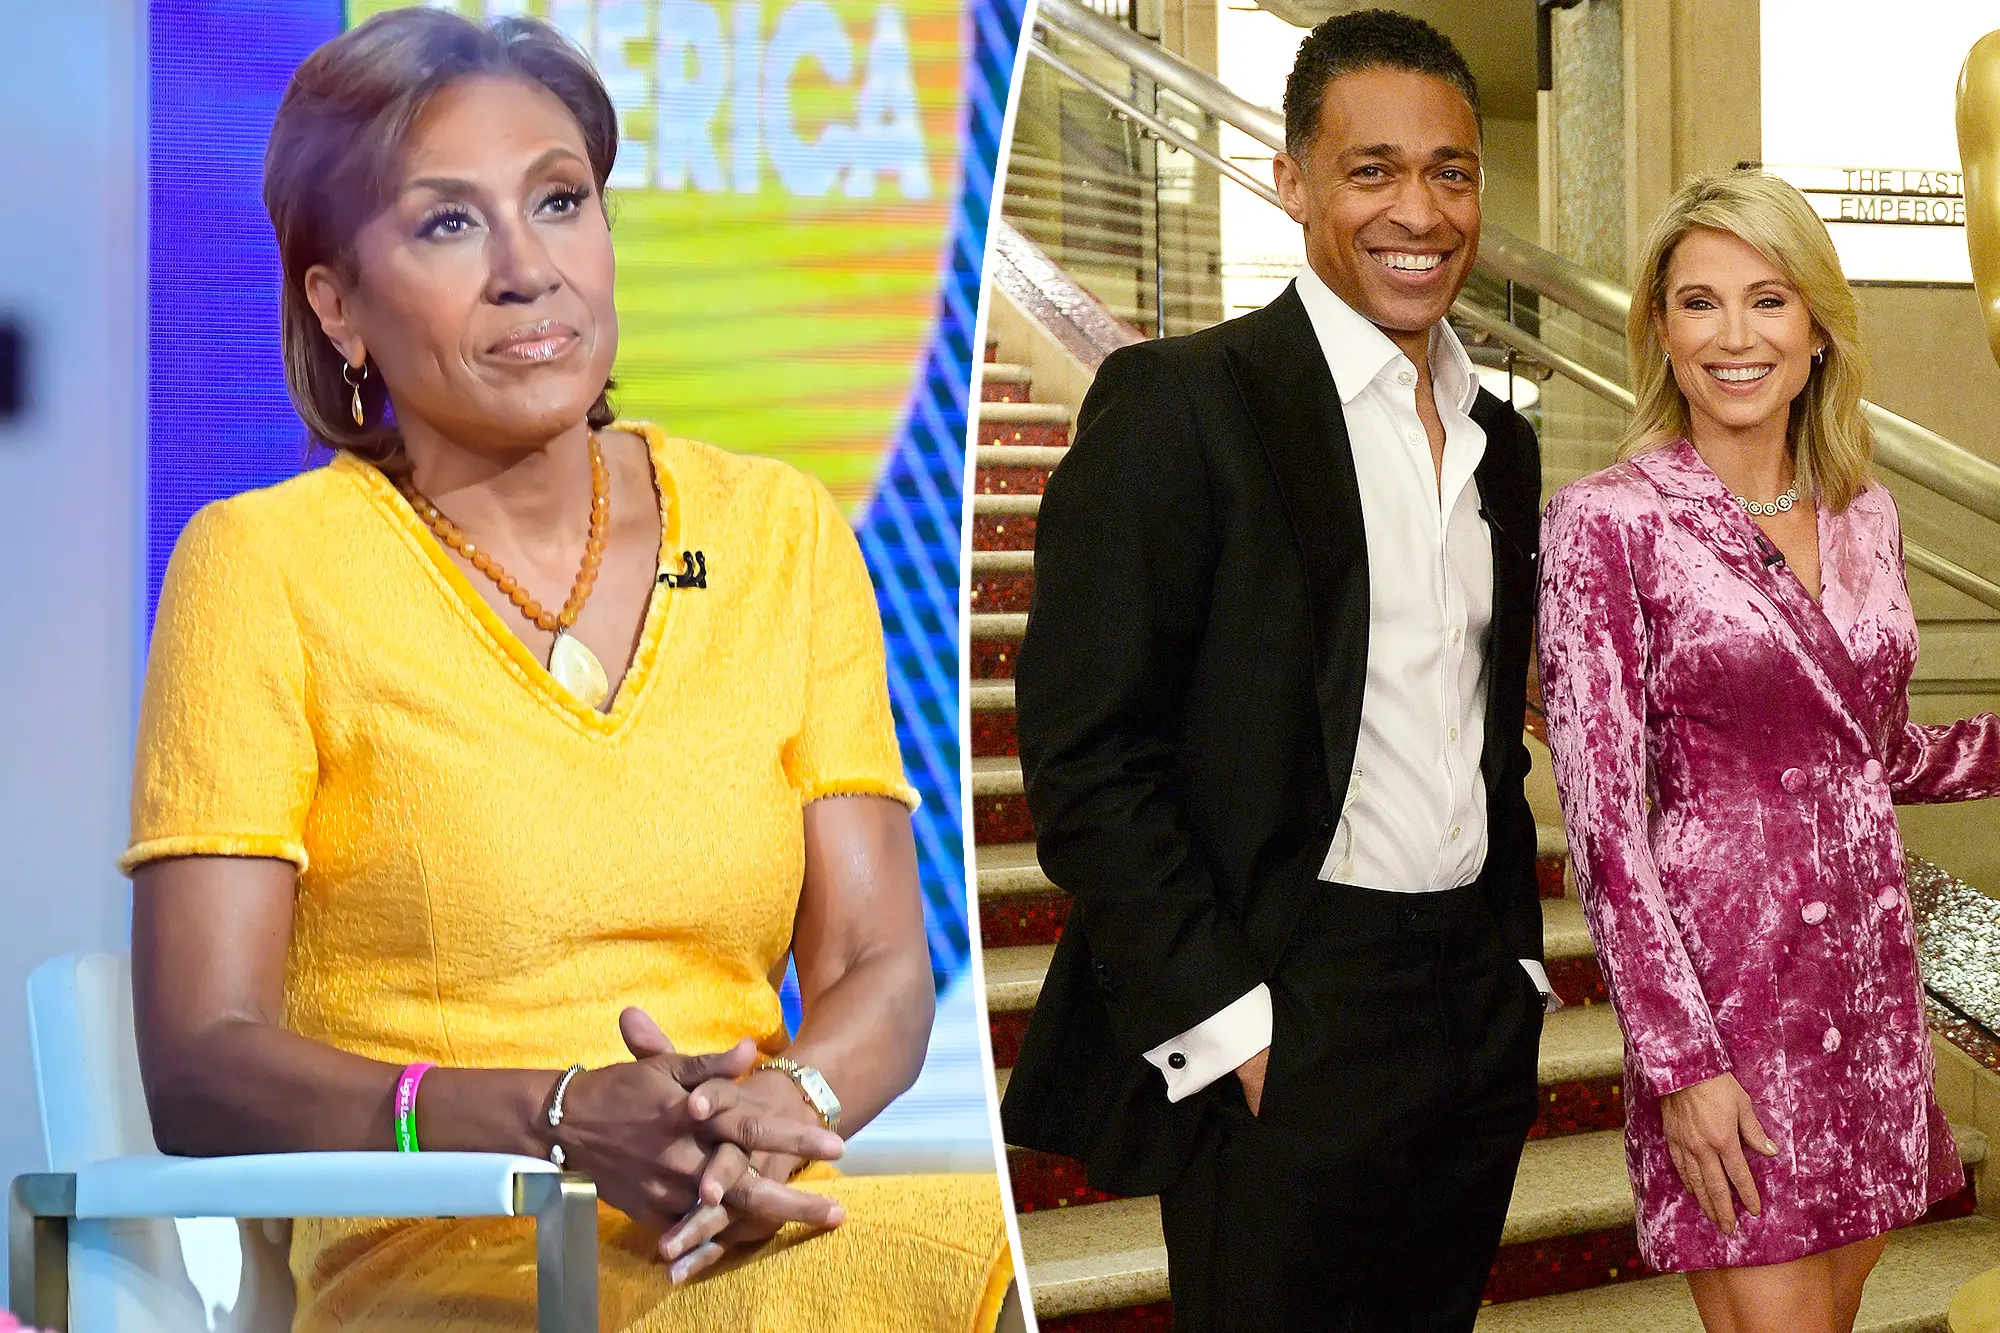 Robin Roberts confronted Amy Robach and T.J. Holmes about the affair